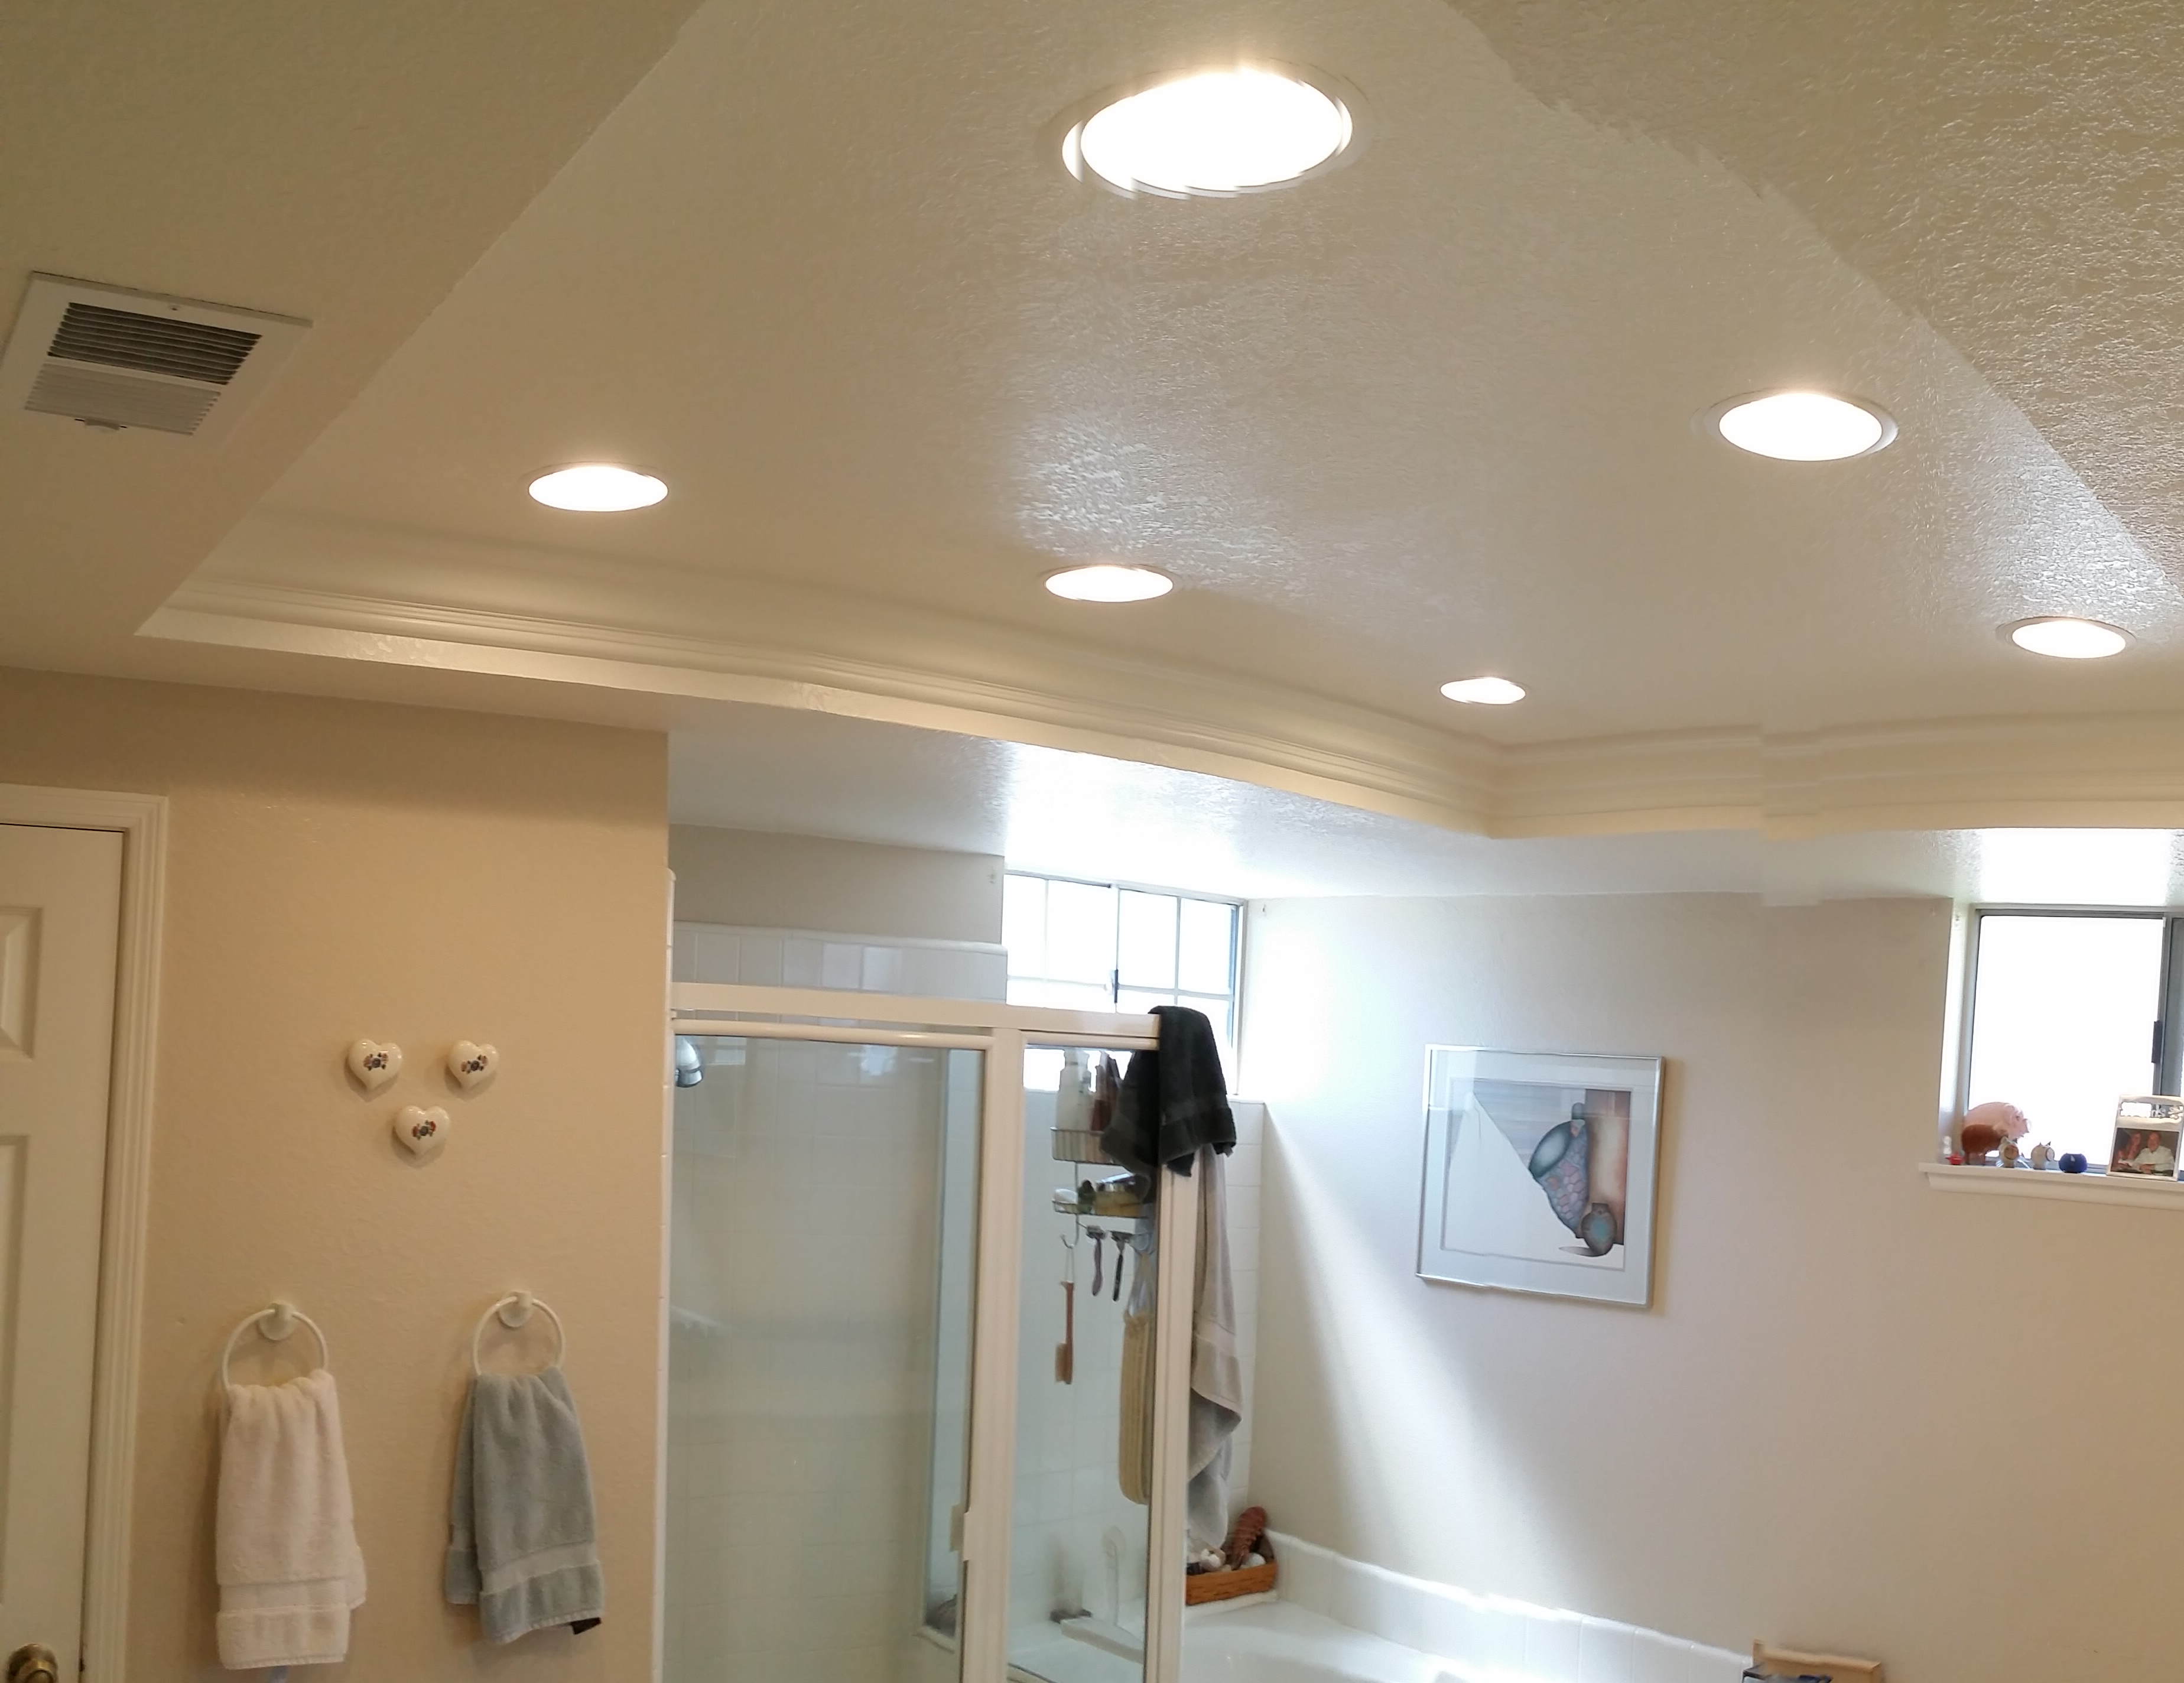 Improve lighting in your home with recessed lighting